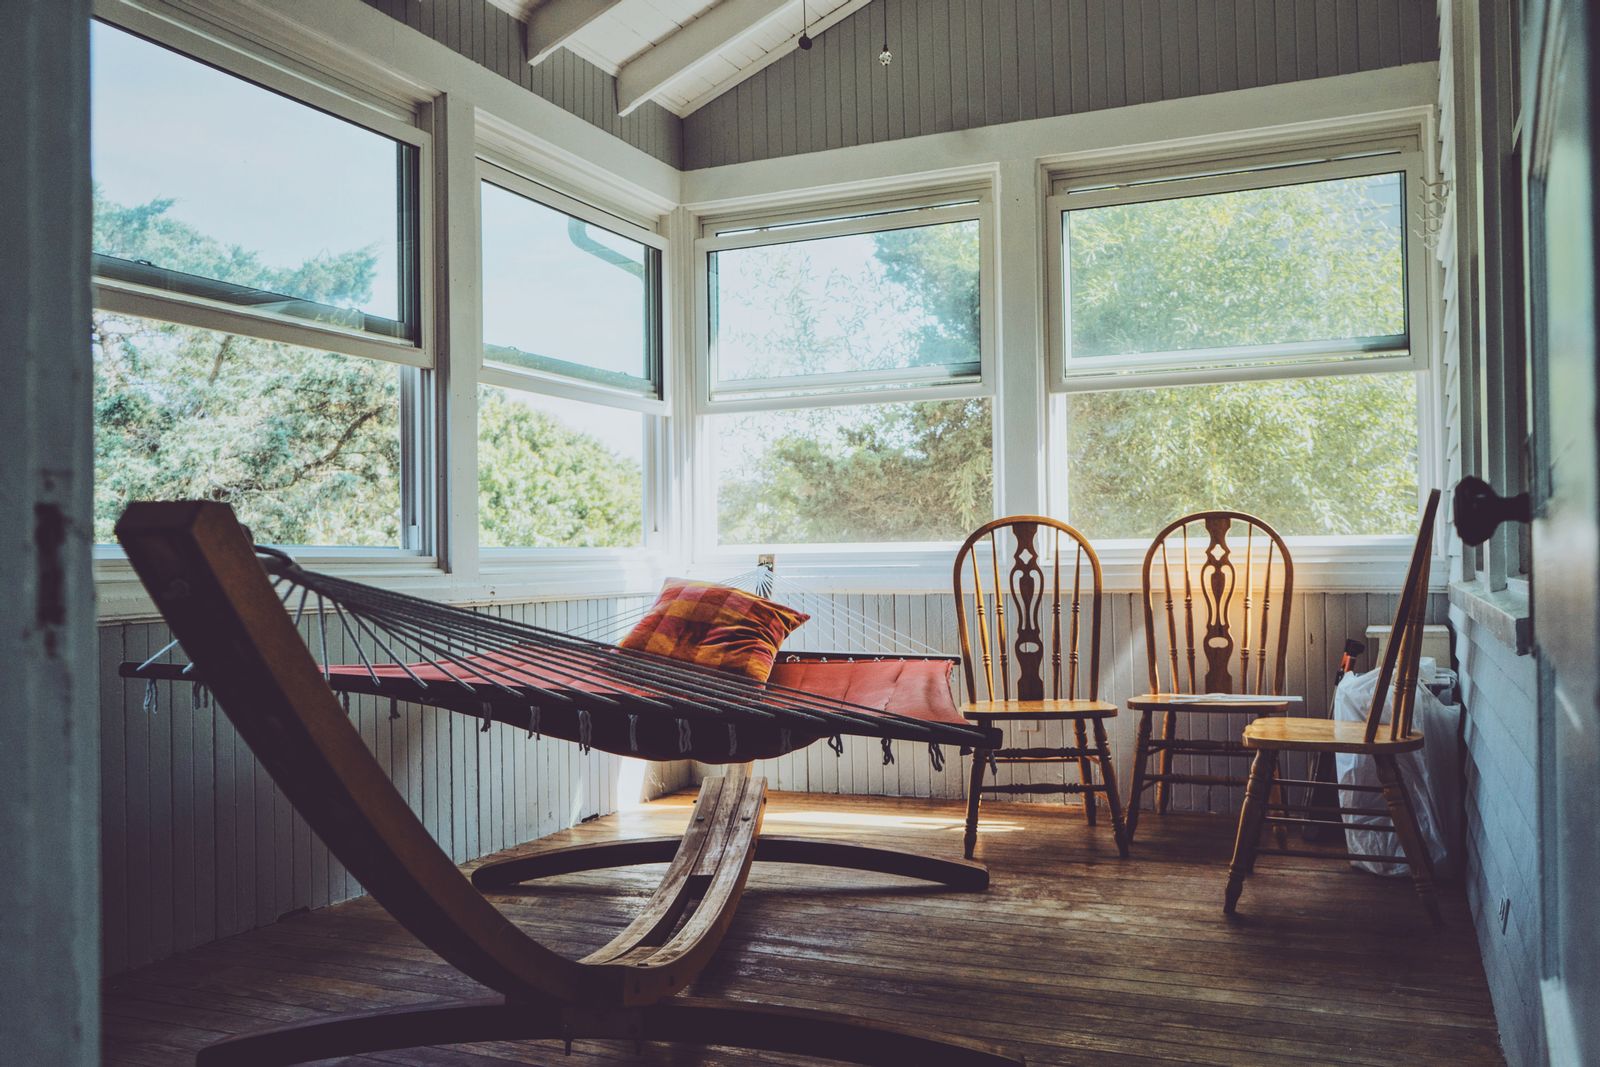 Should You Renovate Your Cottage or Sell As Is?